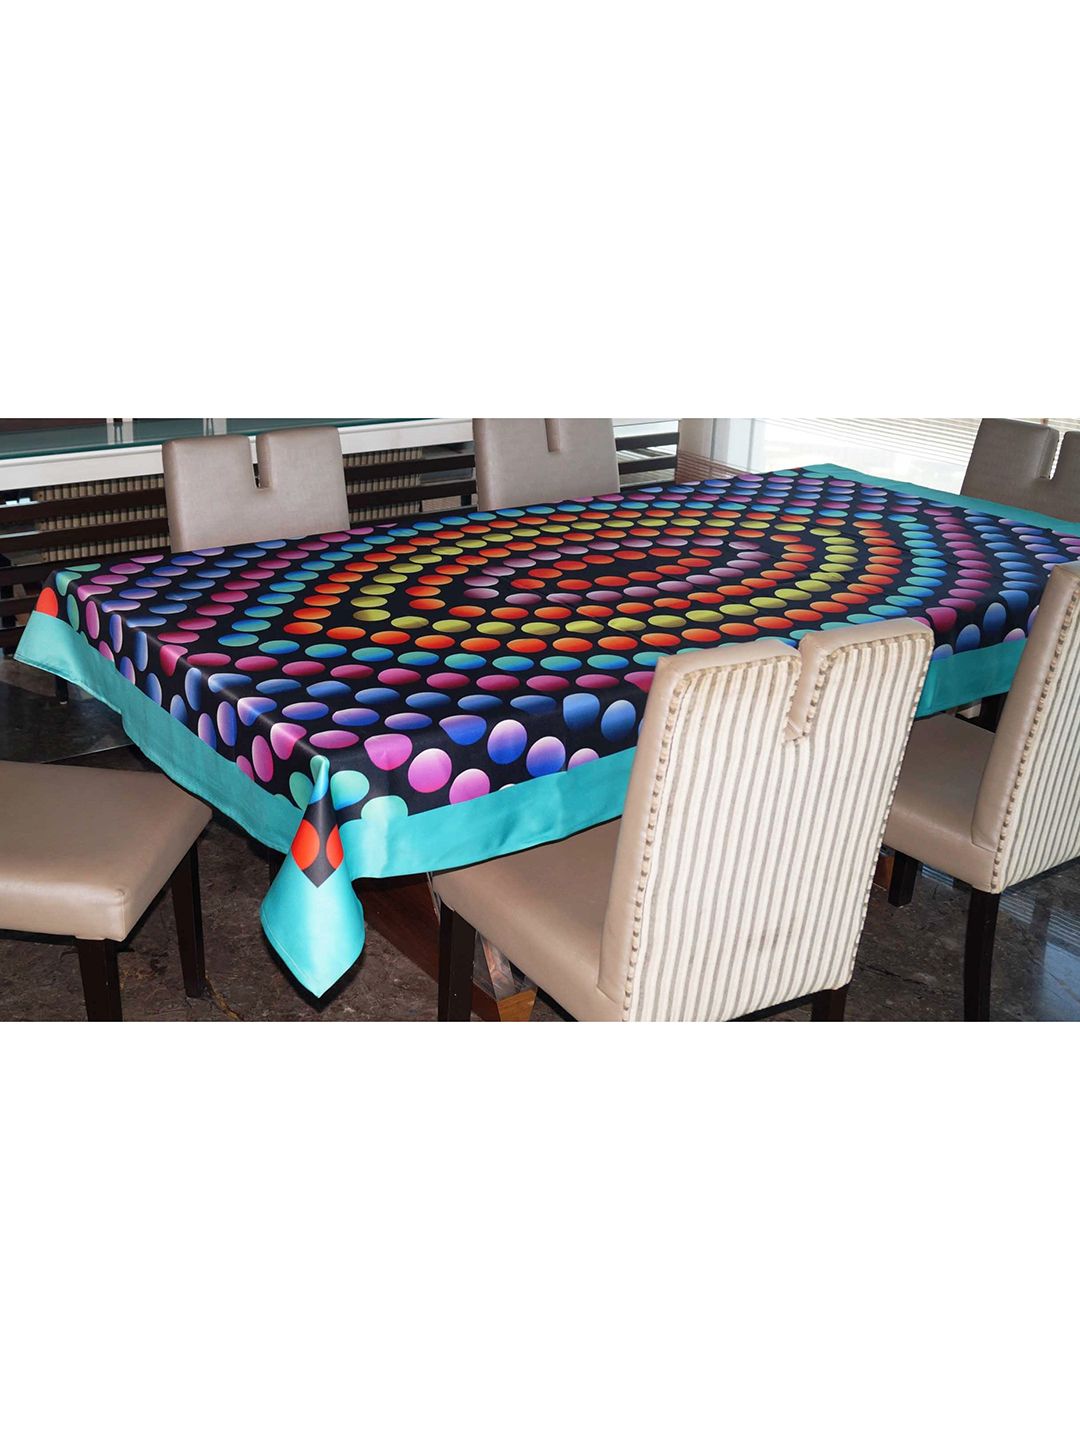 Lushomes Blue & Pink Digital Printed Jacquard 6-Seater Rectangle Table Cover Price in India